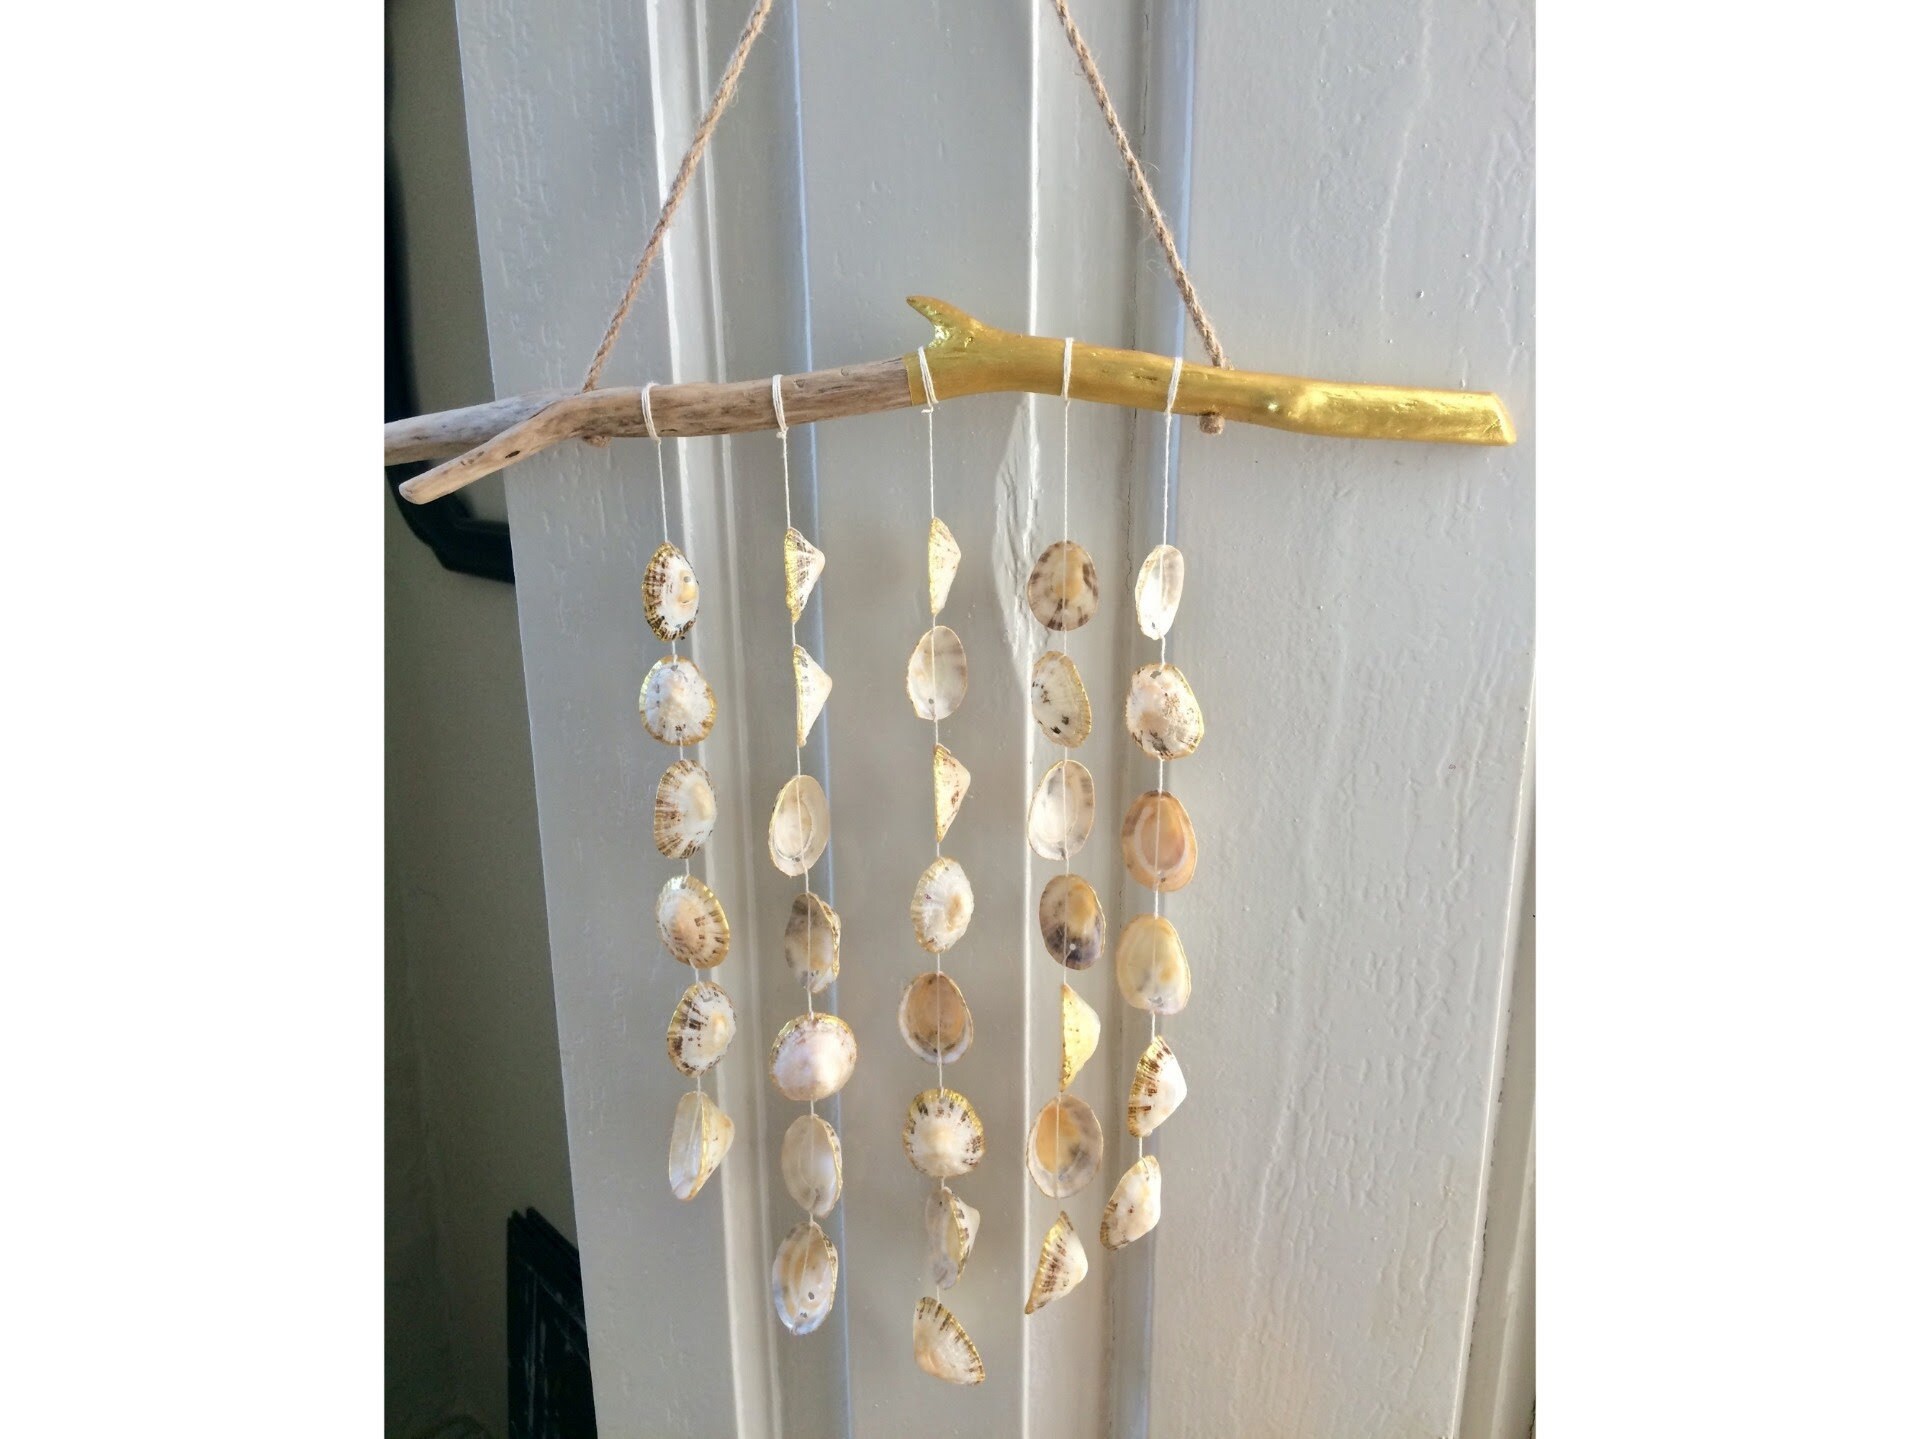 Buy Chic Wind Chime Online In India - Etsy India